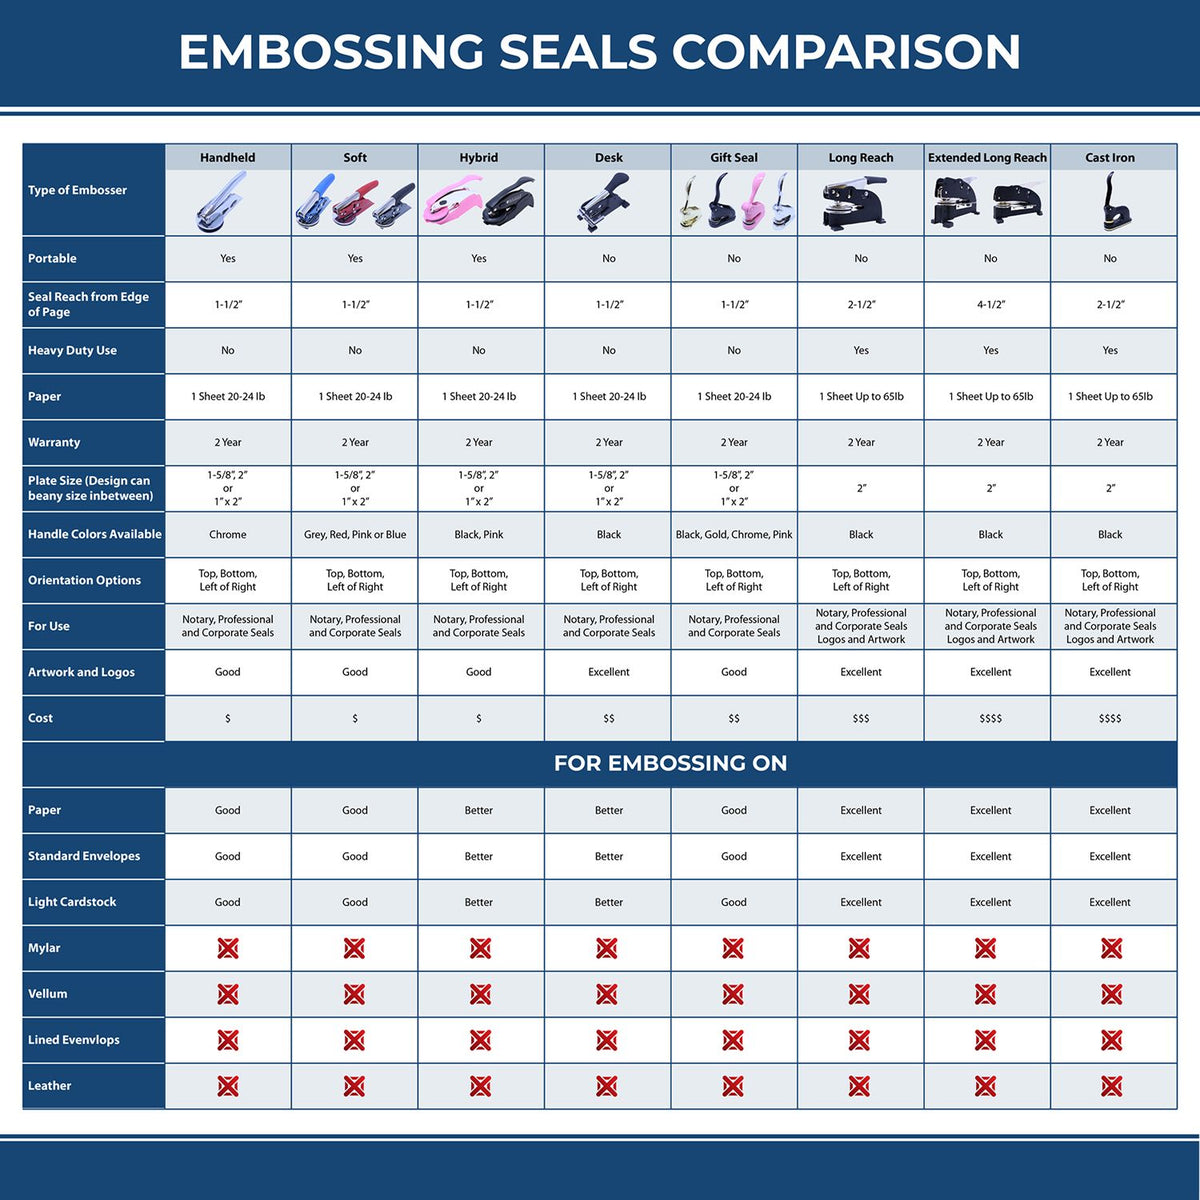 A comparison chart for the different types of mount models available for the State of Georgia Long Reach Architectural Embossing Seal.